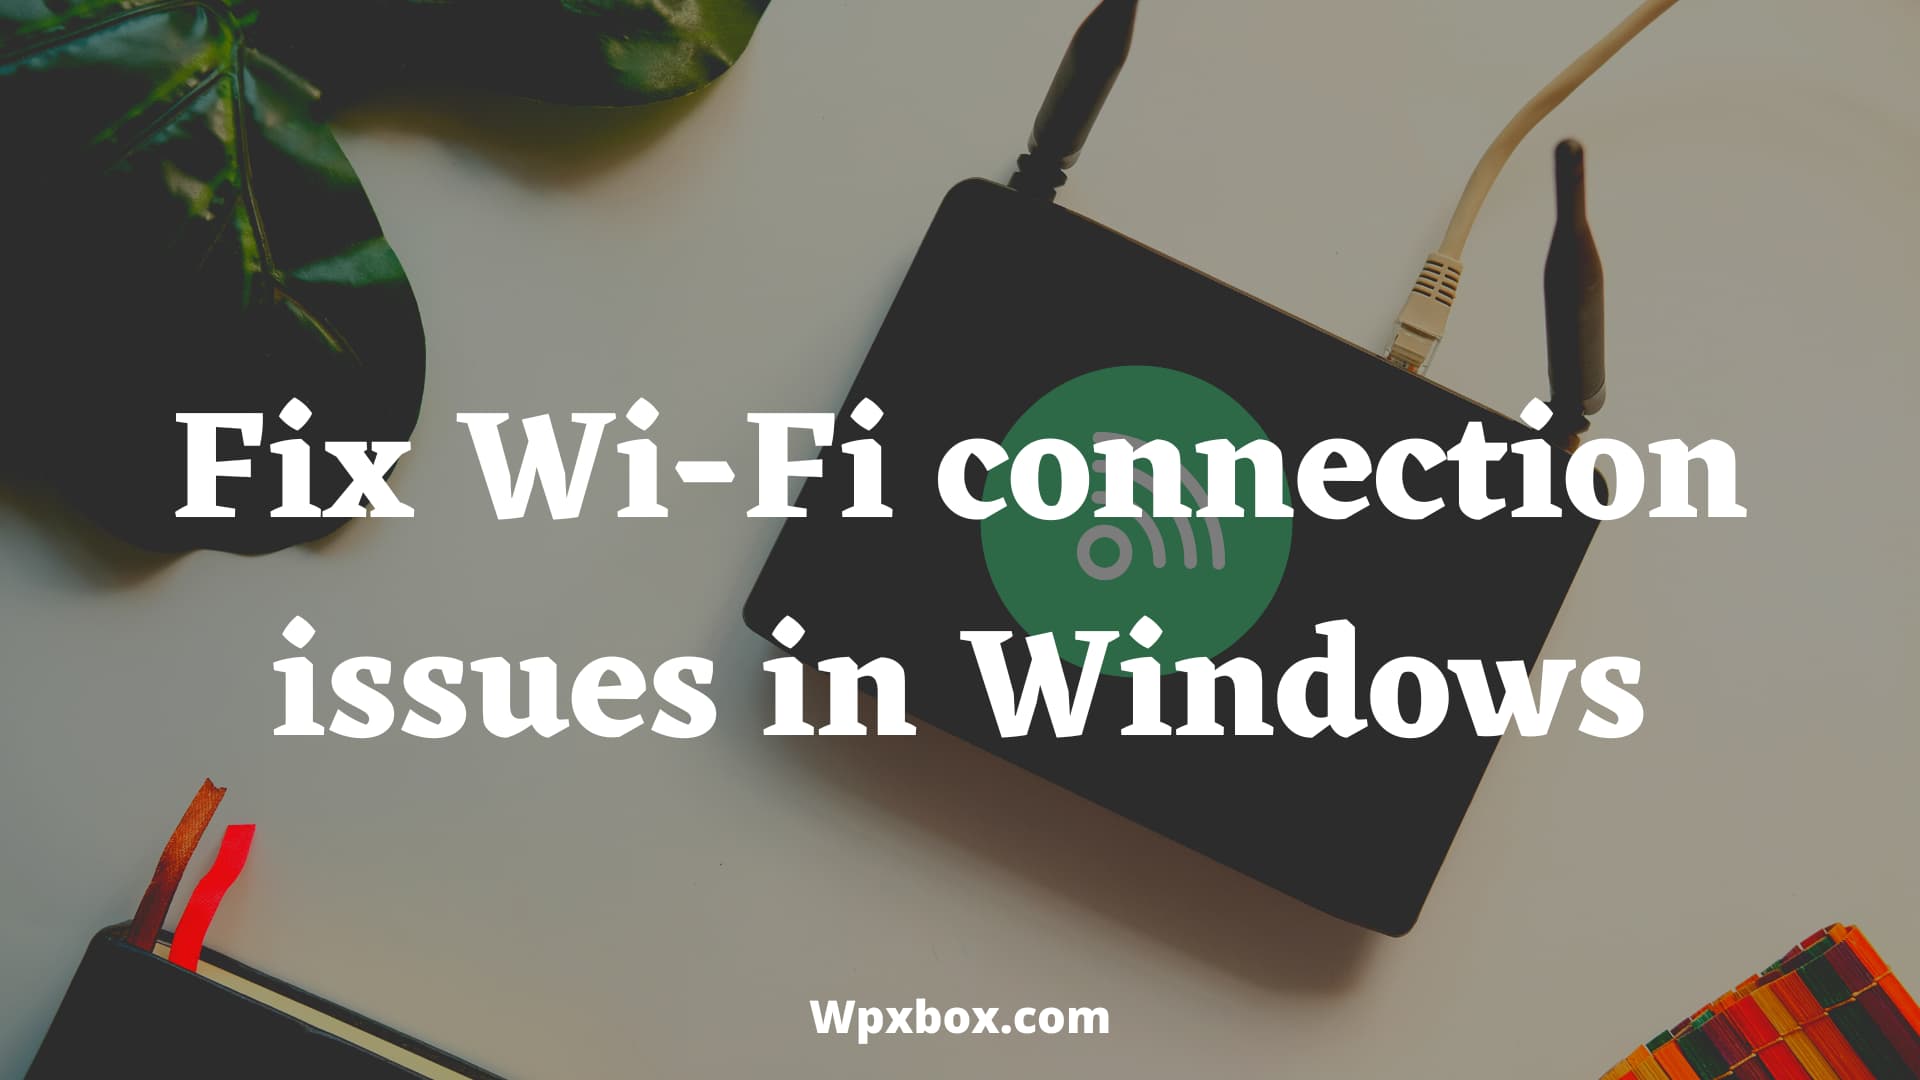 Fix Wi-Fi connection issues in Windows